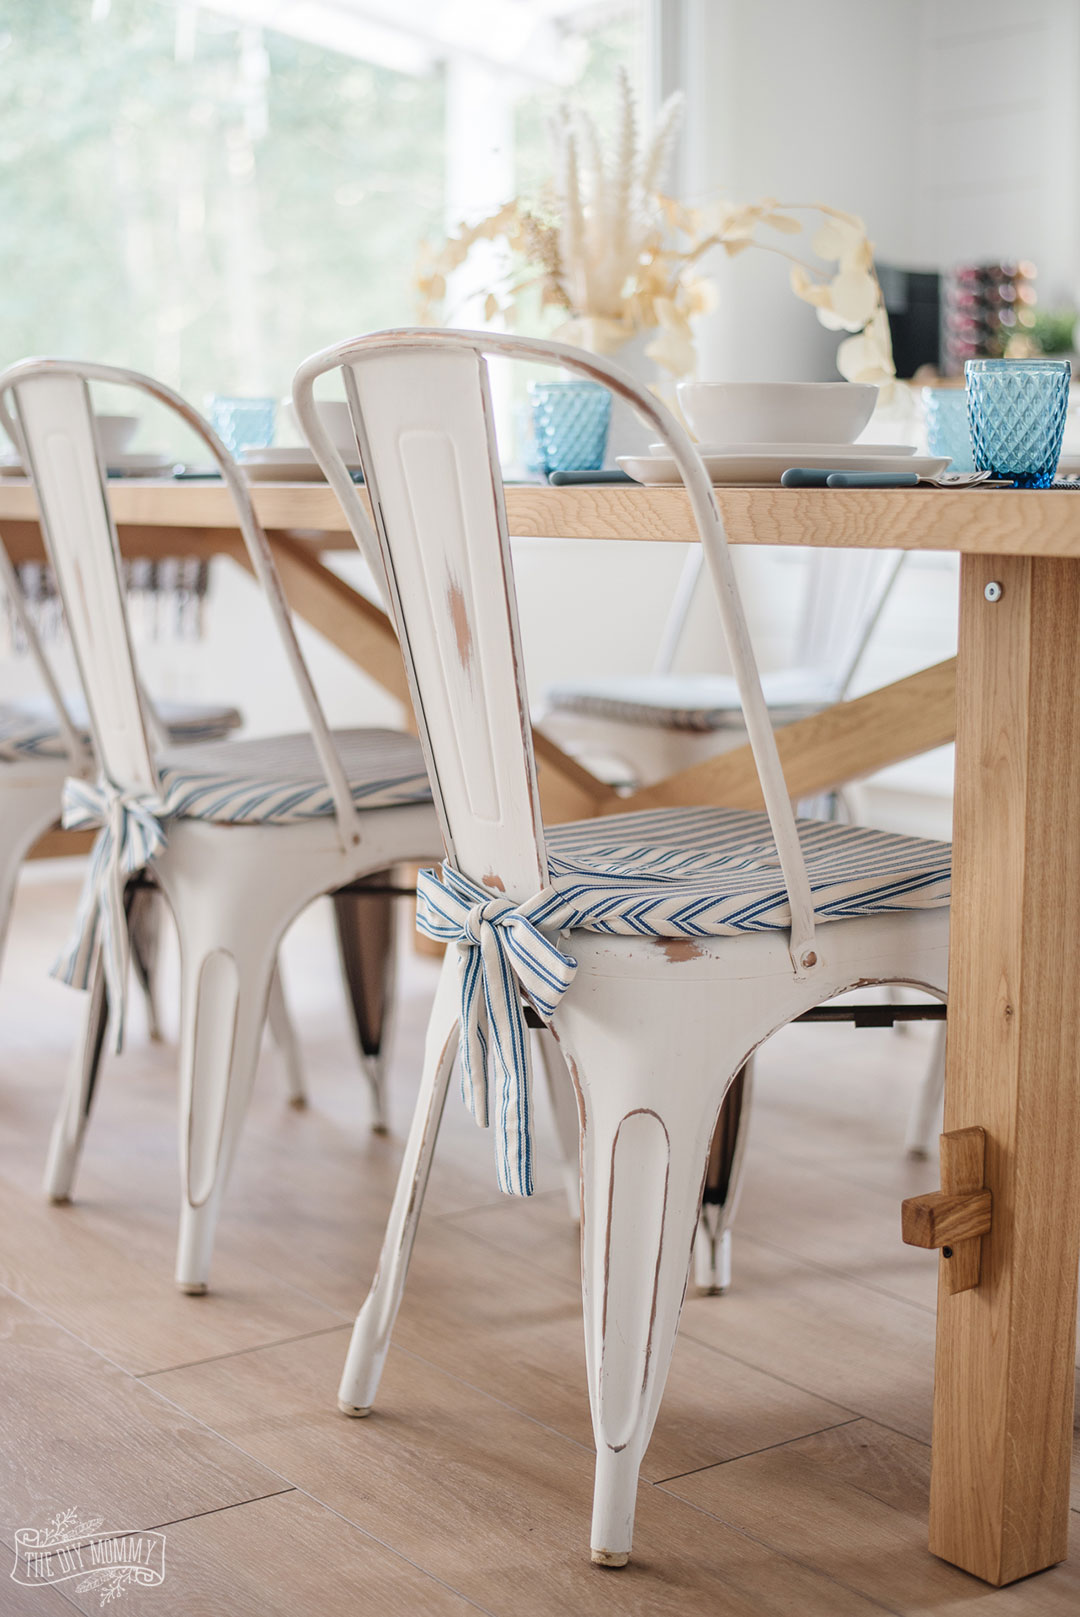 Need to make your metal farmhouse bistro chairs comfier? Learn how to sew these simple DIY chair pads with adorable bow ties at the back! These are an easy beginner's sewing project and you can make them to match any decor style.